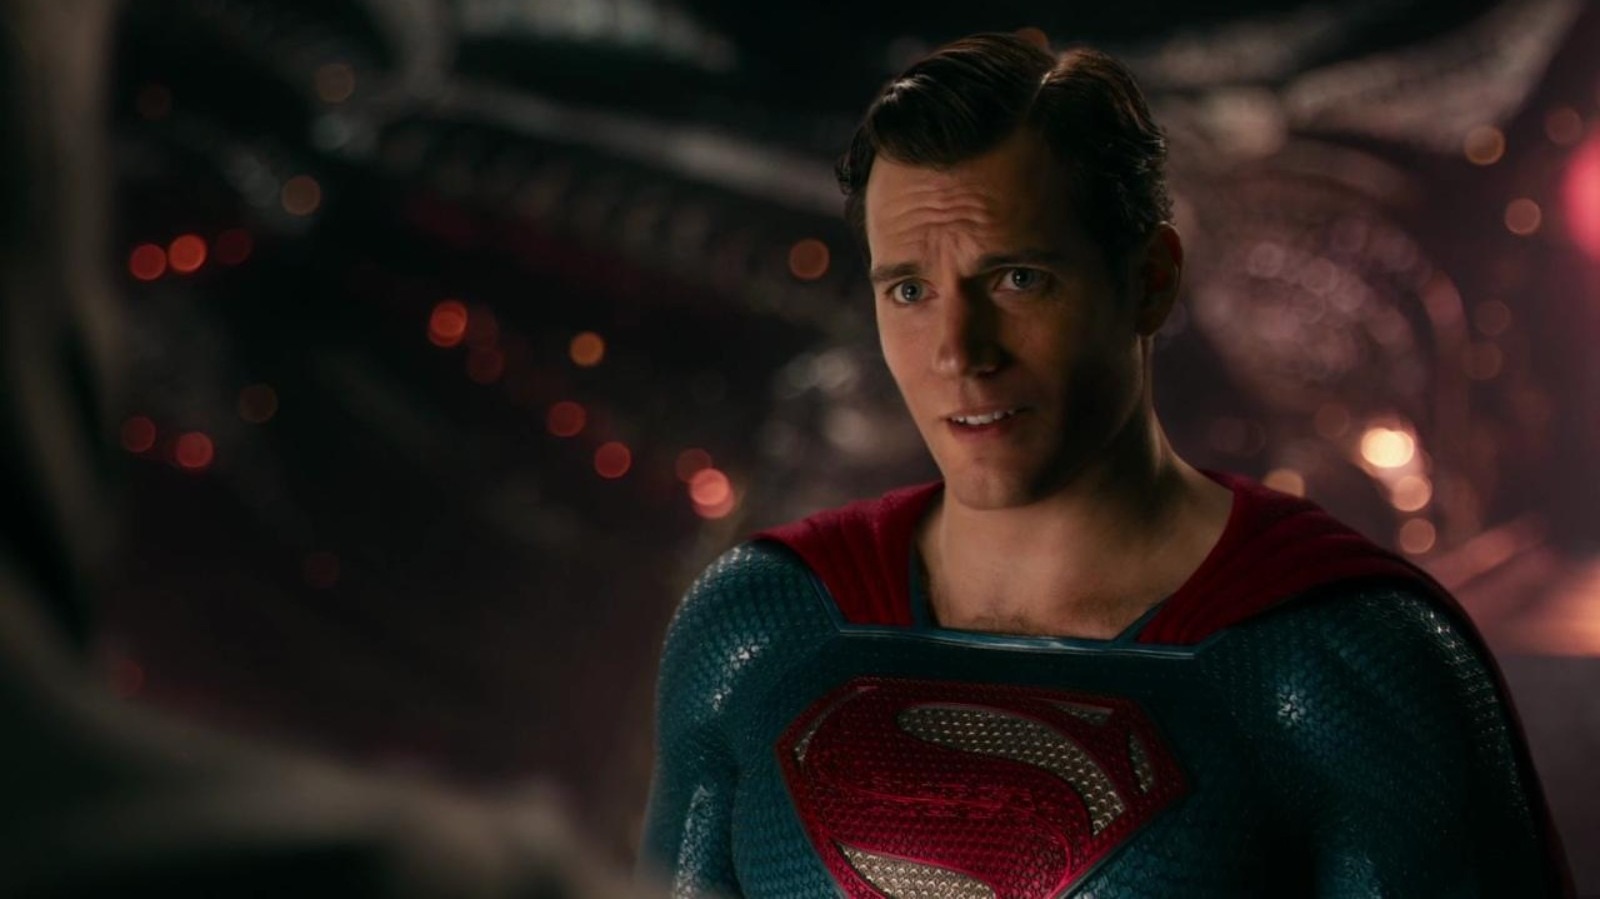 There Will Be a New 'Superman' Movie — It Just Won't Star Henry